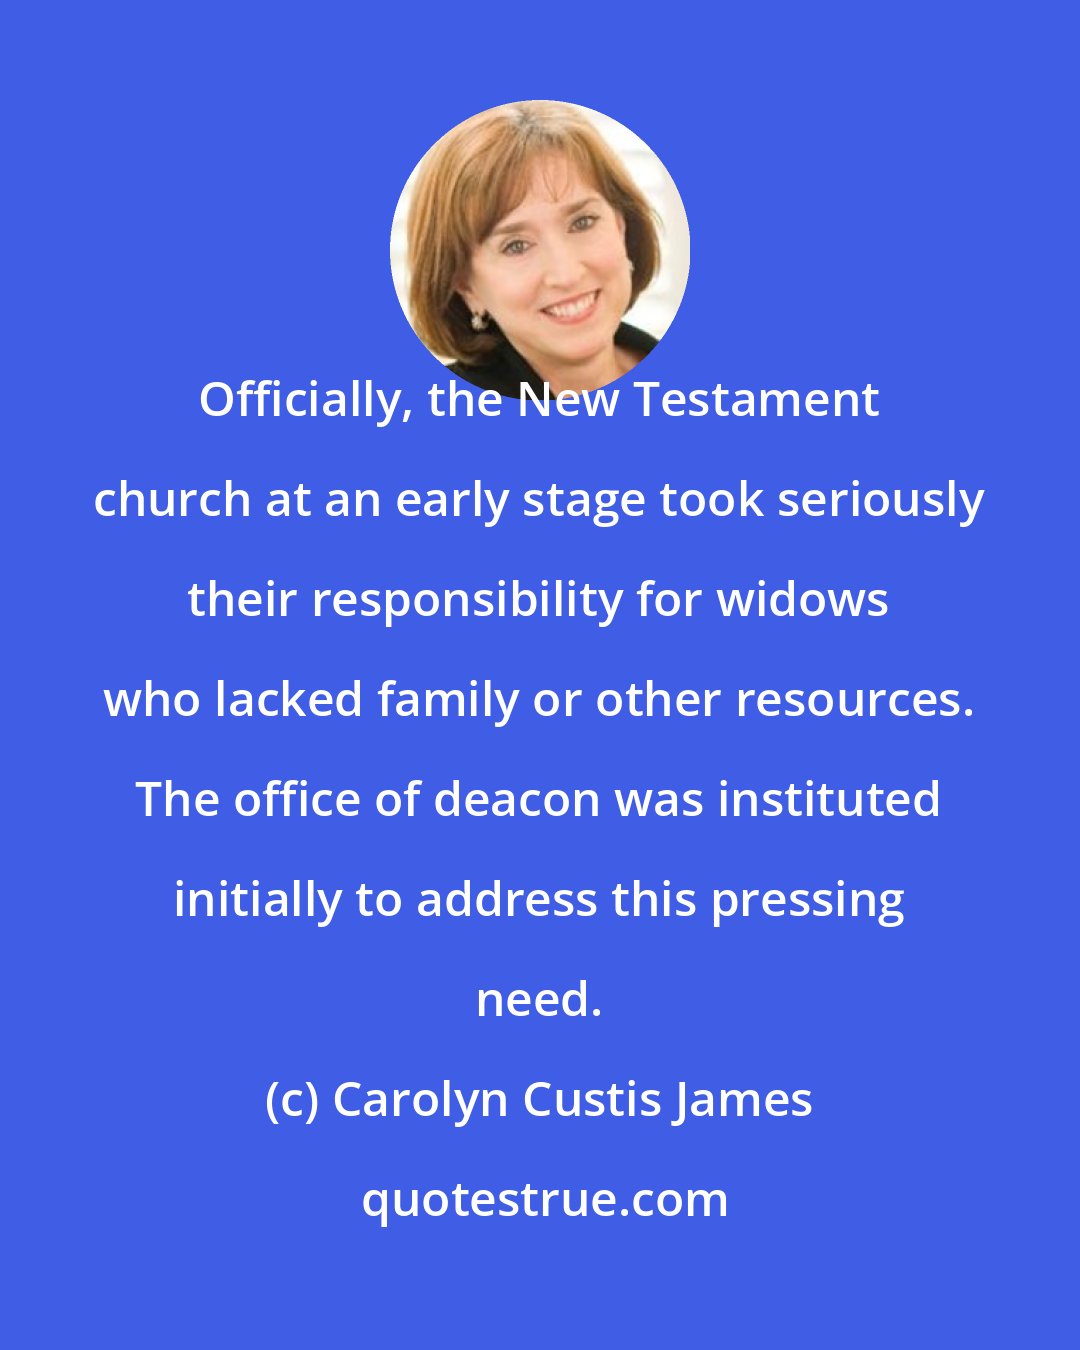 Carolyn Custis James: Officially, the New Testament church at an early stage took seriously their responsibility for widows who lacked family or other resources. The office of deacon was instituted initially to address this pressing need.